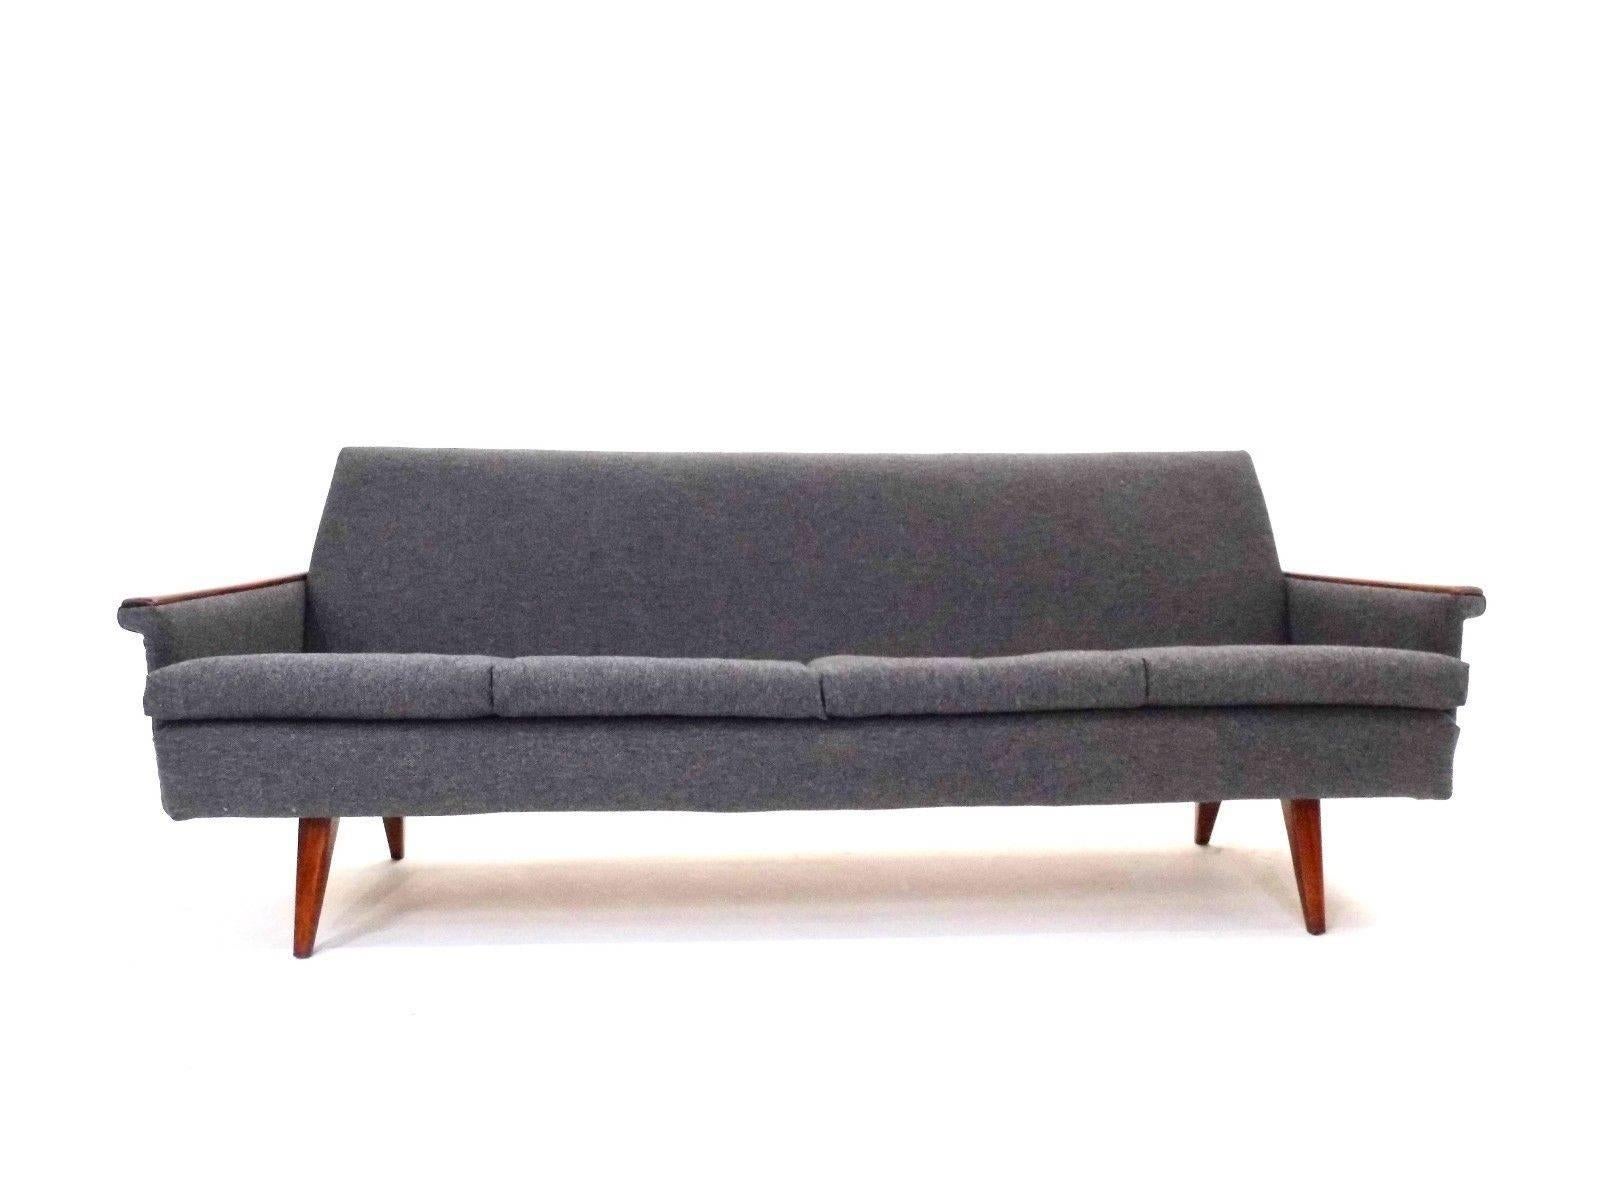 A beautiful Norwegian dark grey wool and teak three-seat sofa, this would make a stylish addition to any living or work area. The sofa has a high padded back and sculptured armrests for enhanced comfort. A striking piece of Classic Scandinavian